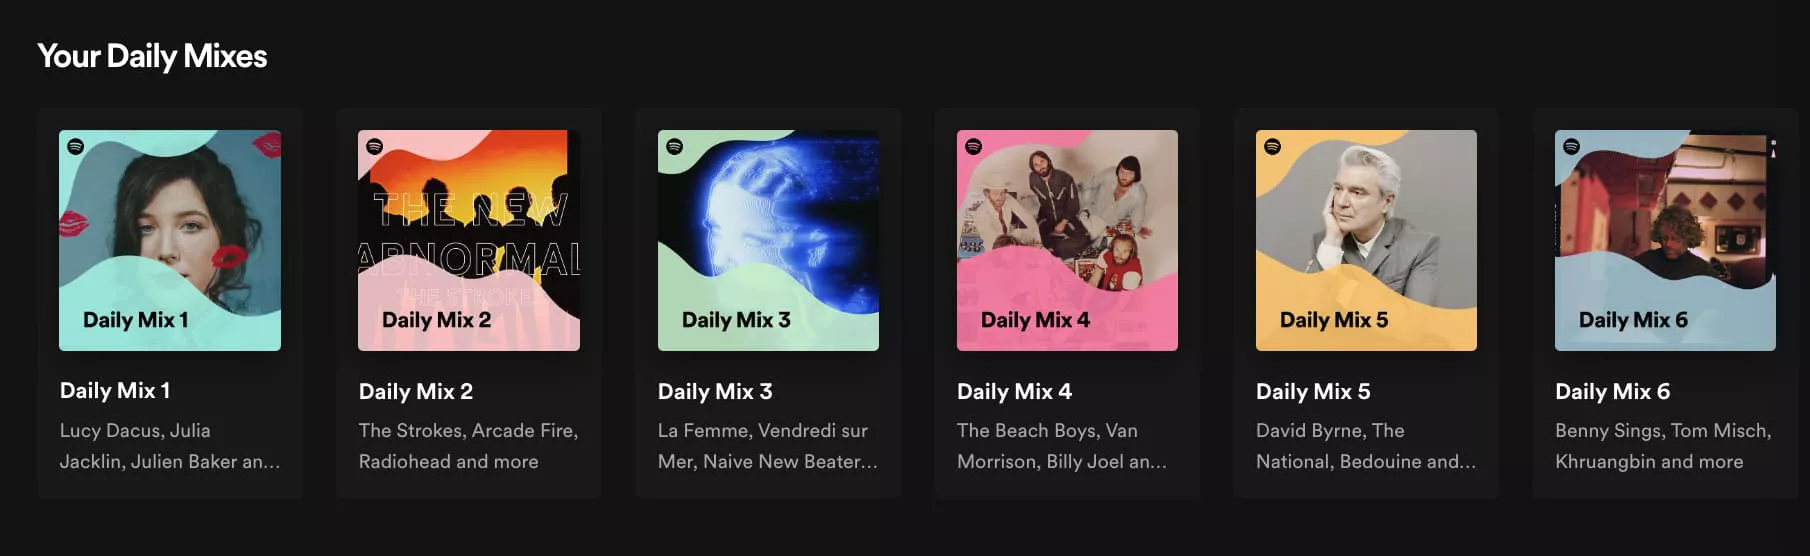 Spotify is a perfect example of personalization